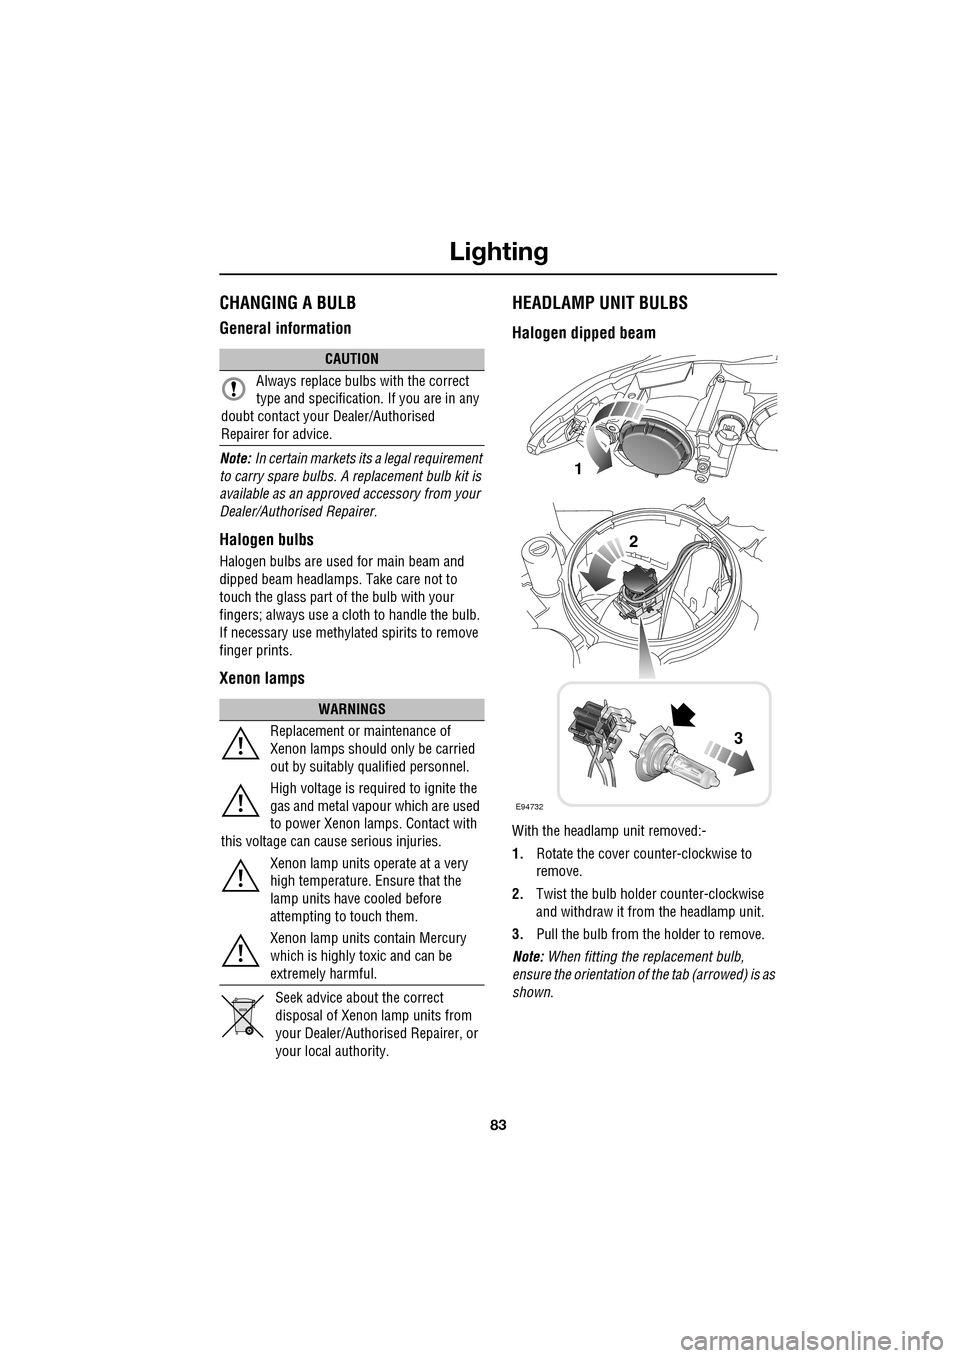 JAGUAR XF 2009 1.G Owners Manual 83
Lighting
               
CHANGING A BULB
General information
Note: In certain markets its a legal requirement 
to carry spare bulbs. A  replacement bulb kit is 
available as an approved  accessory 